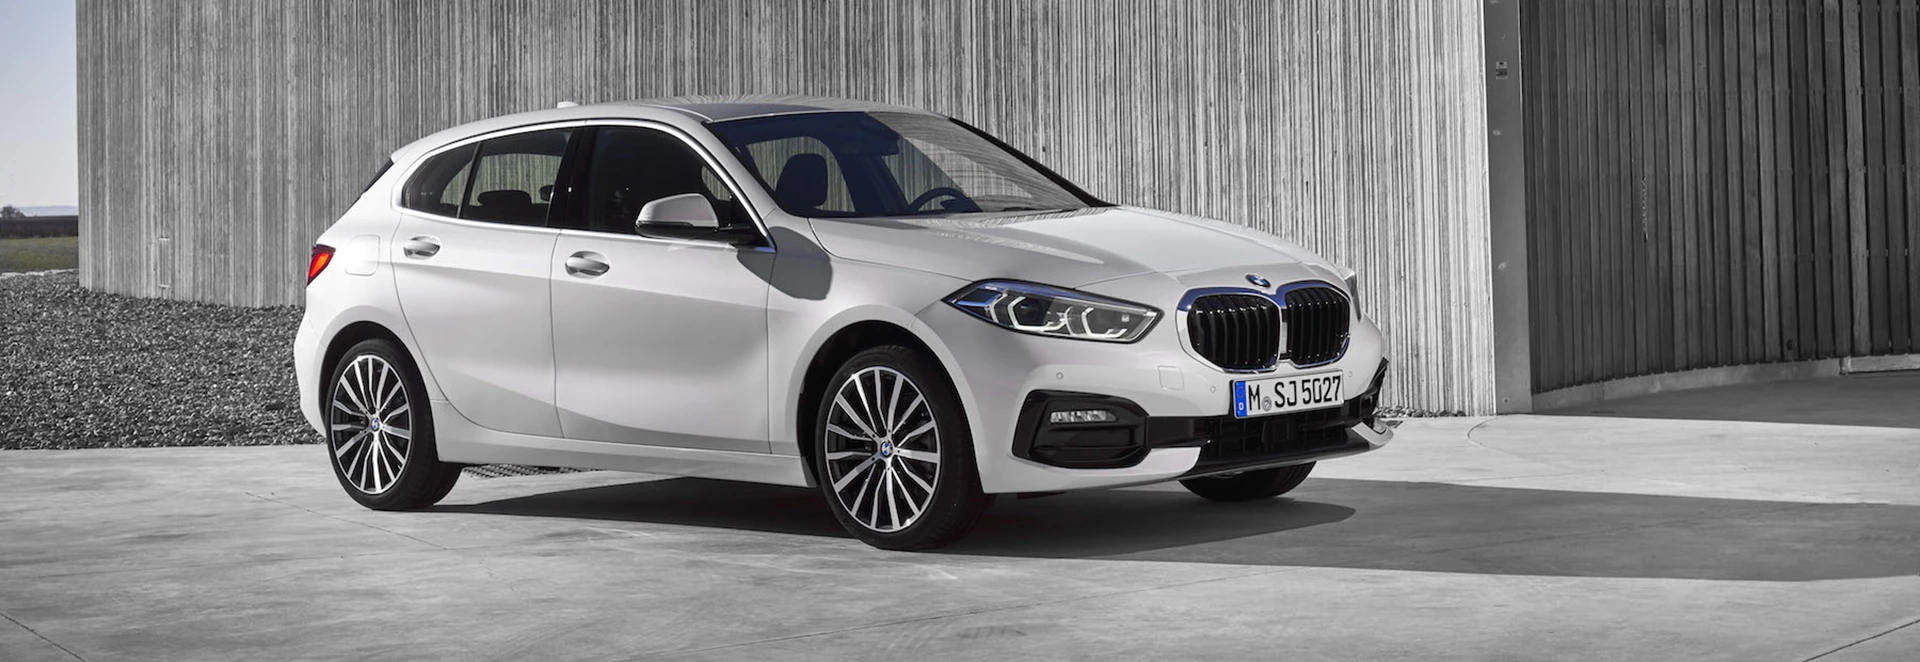 Five cool pieces of tech on the BMW 1 Series